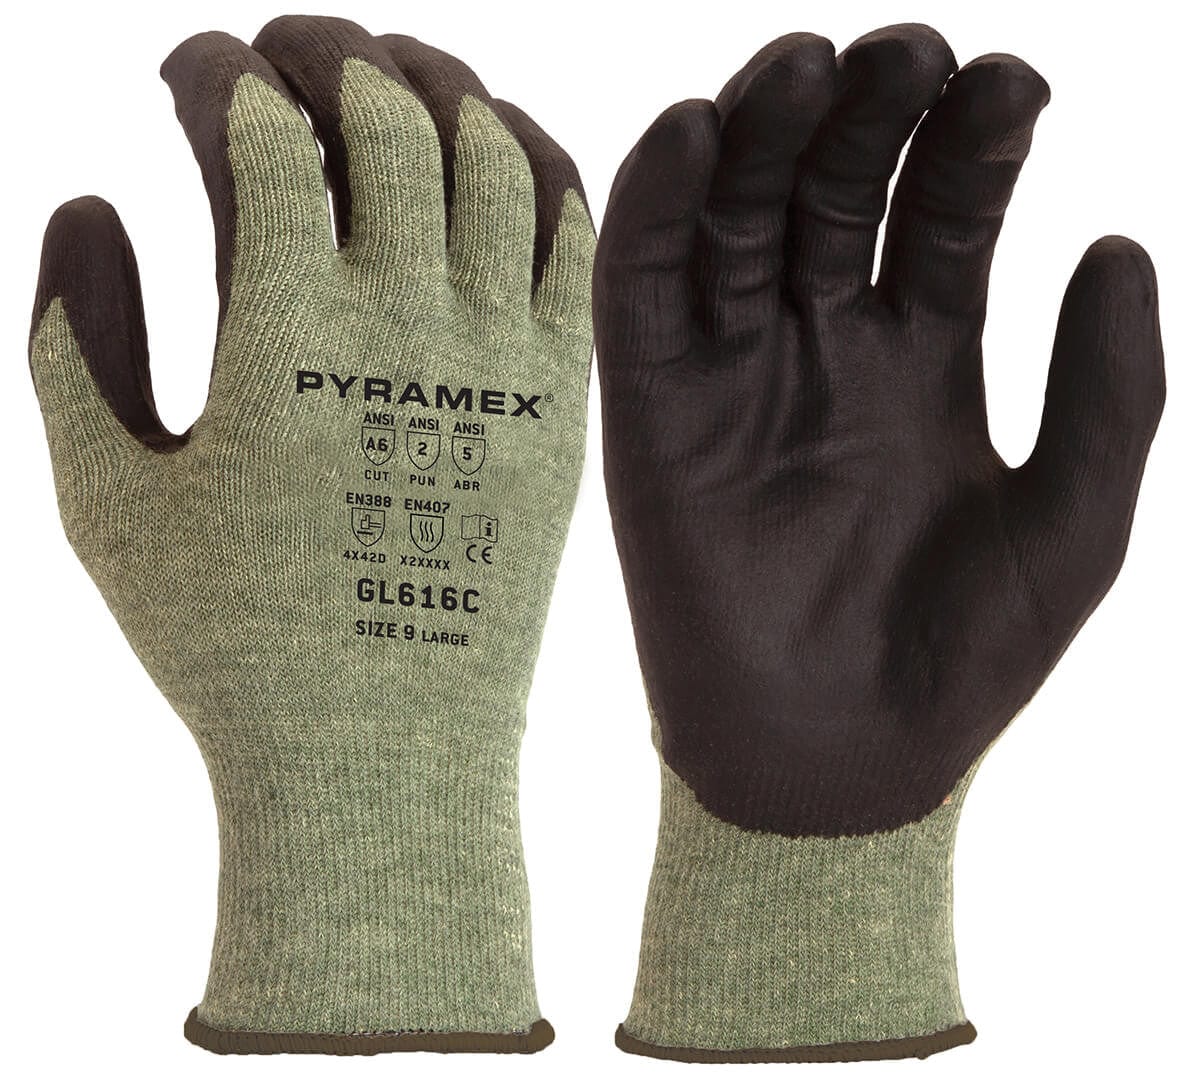 Hex1 2132 Coyote Tactical Gloves | SafetyGloves by HexArmor M